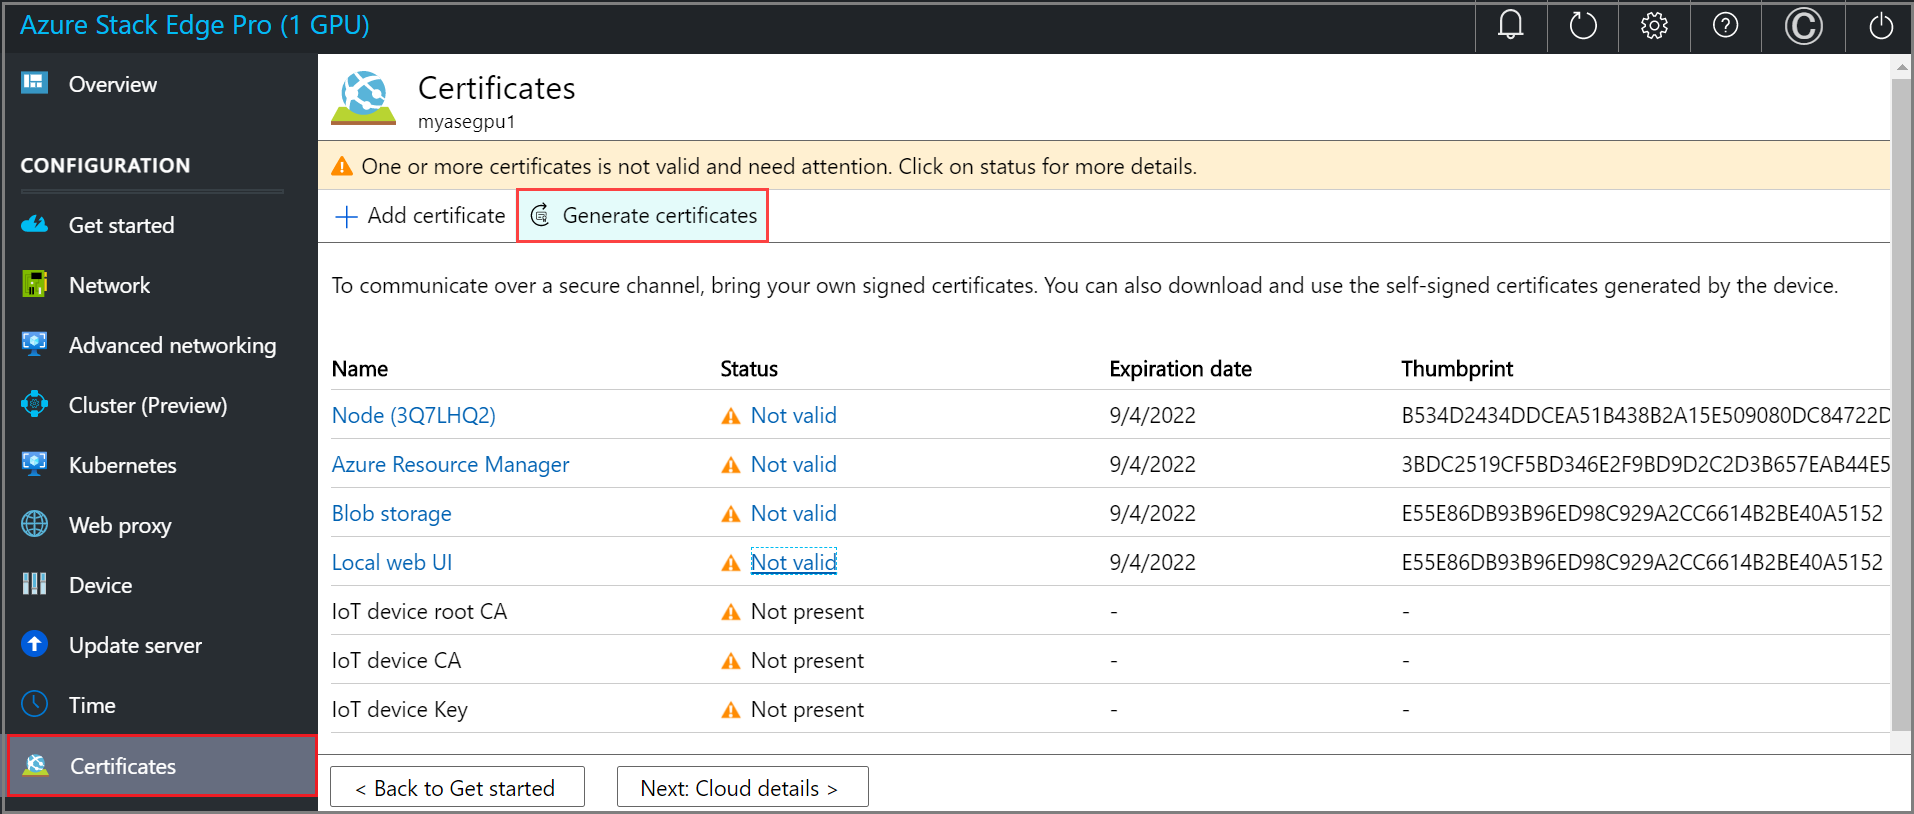 Screenshot of the Certificates page in the local web UI of an Azure Stack Edge device. The Generate Certificates button is highlighted.